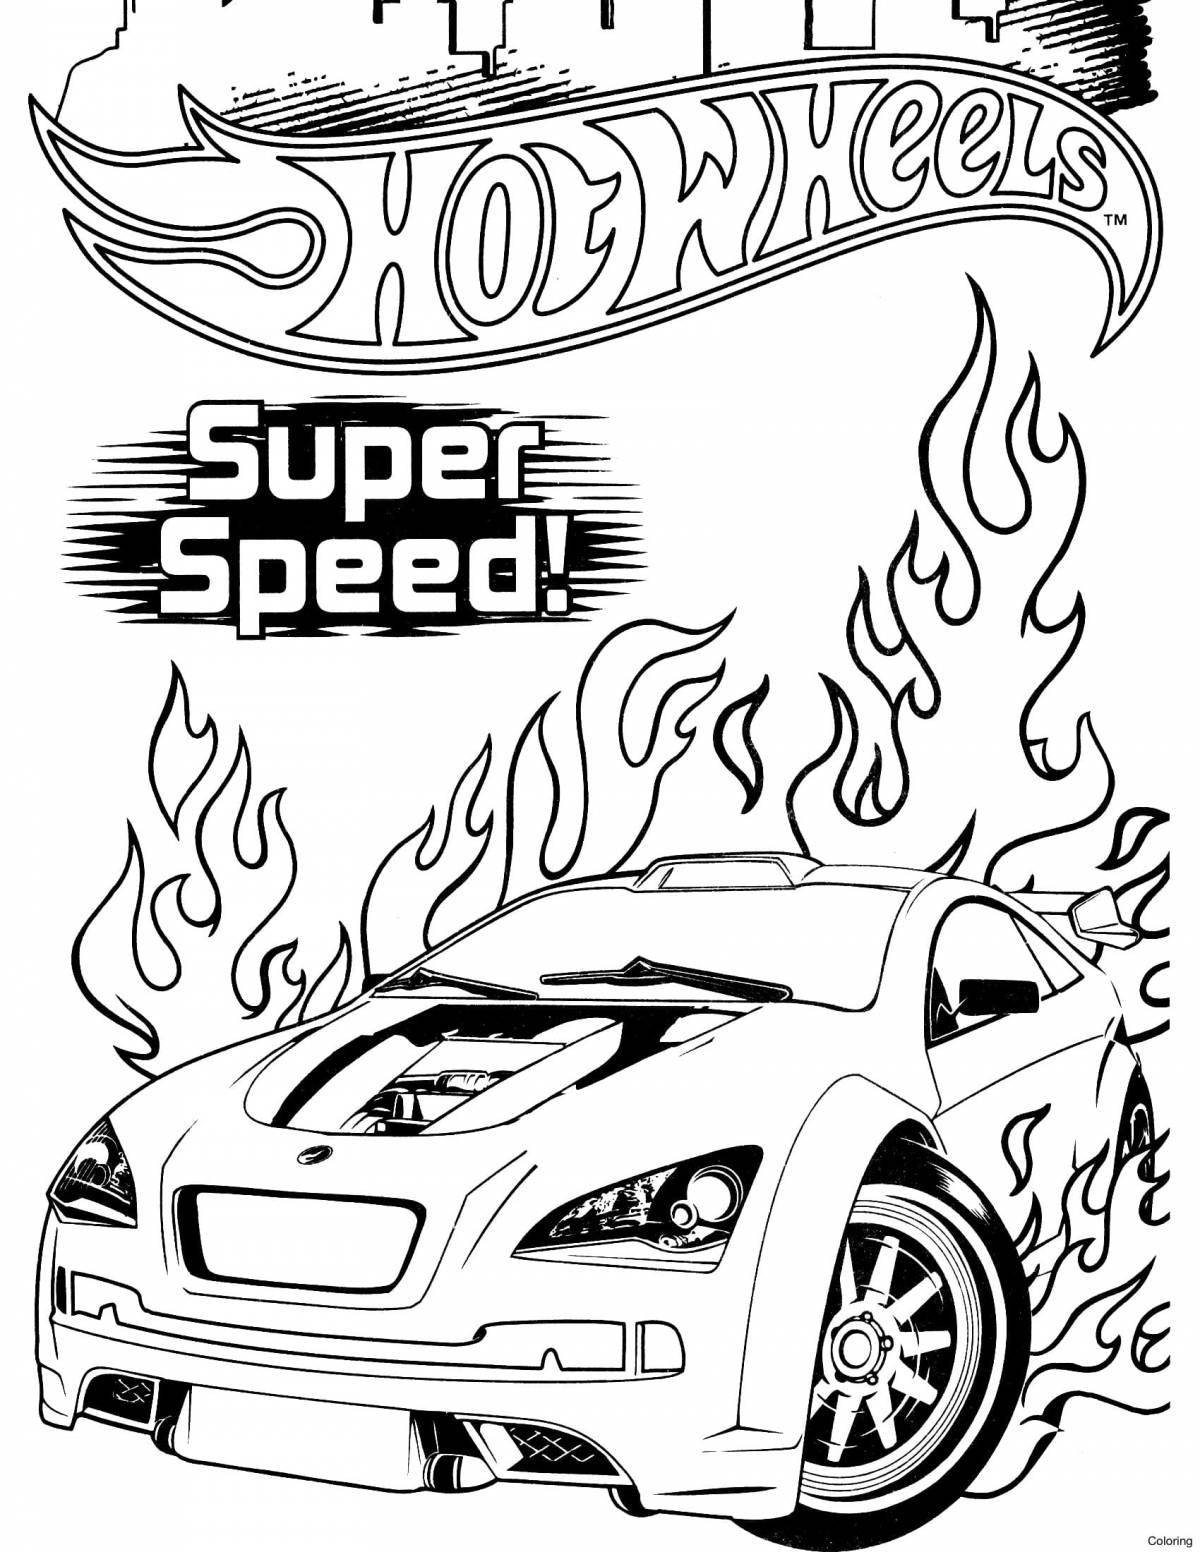 Lovely hot wheels coloring book for 4-5 year olds